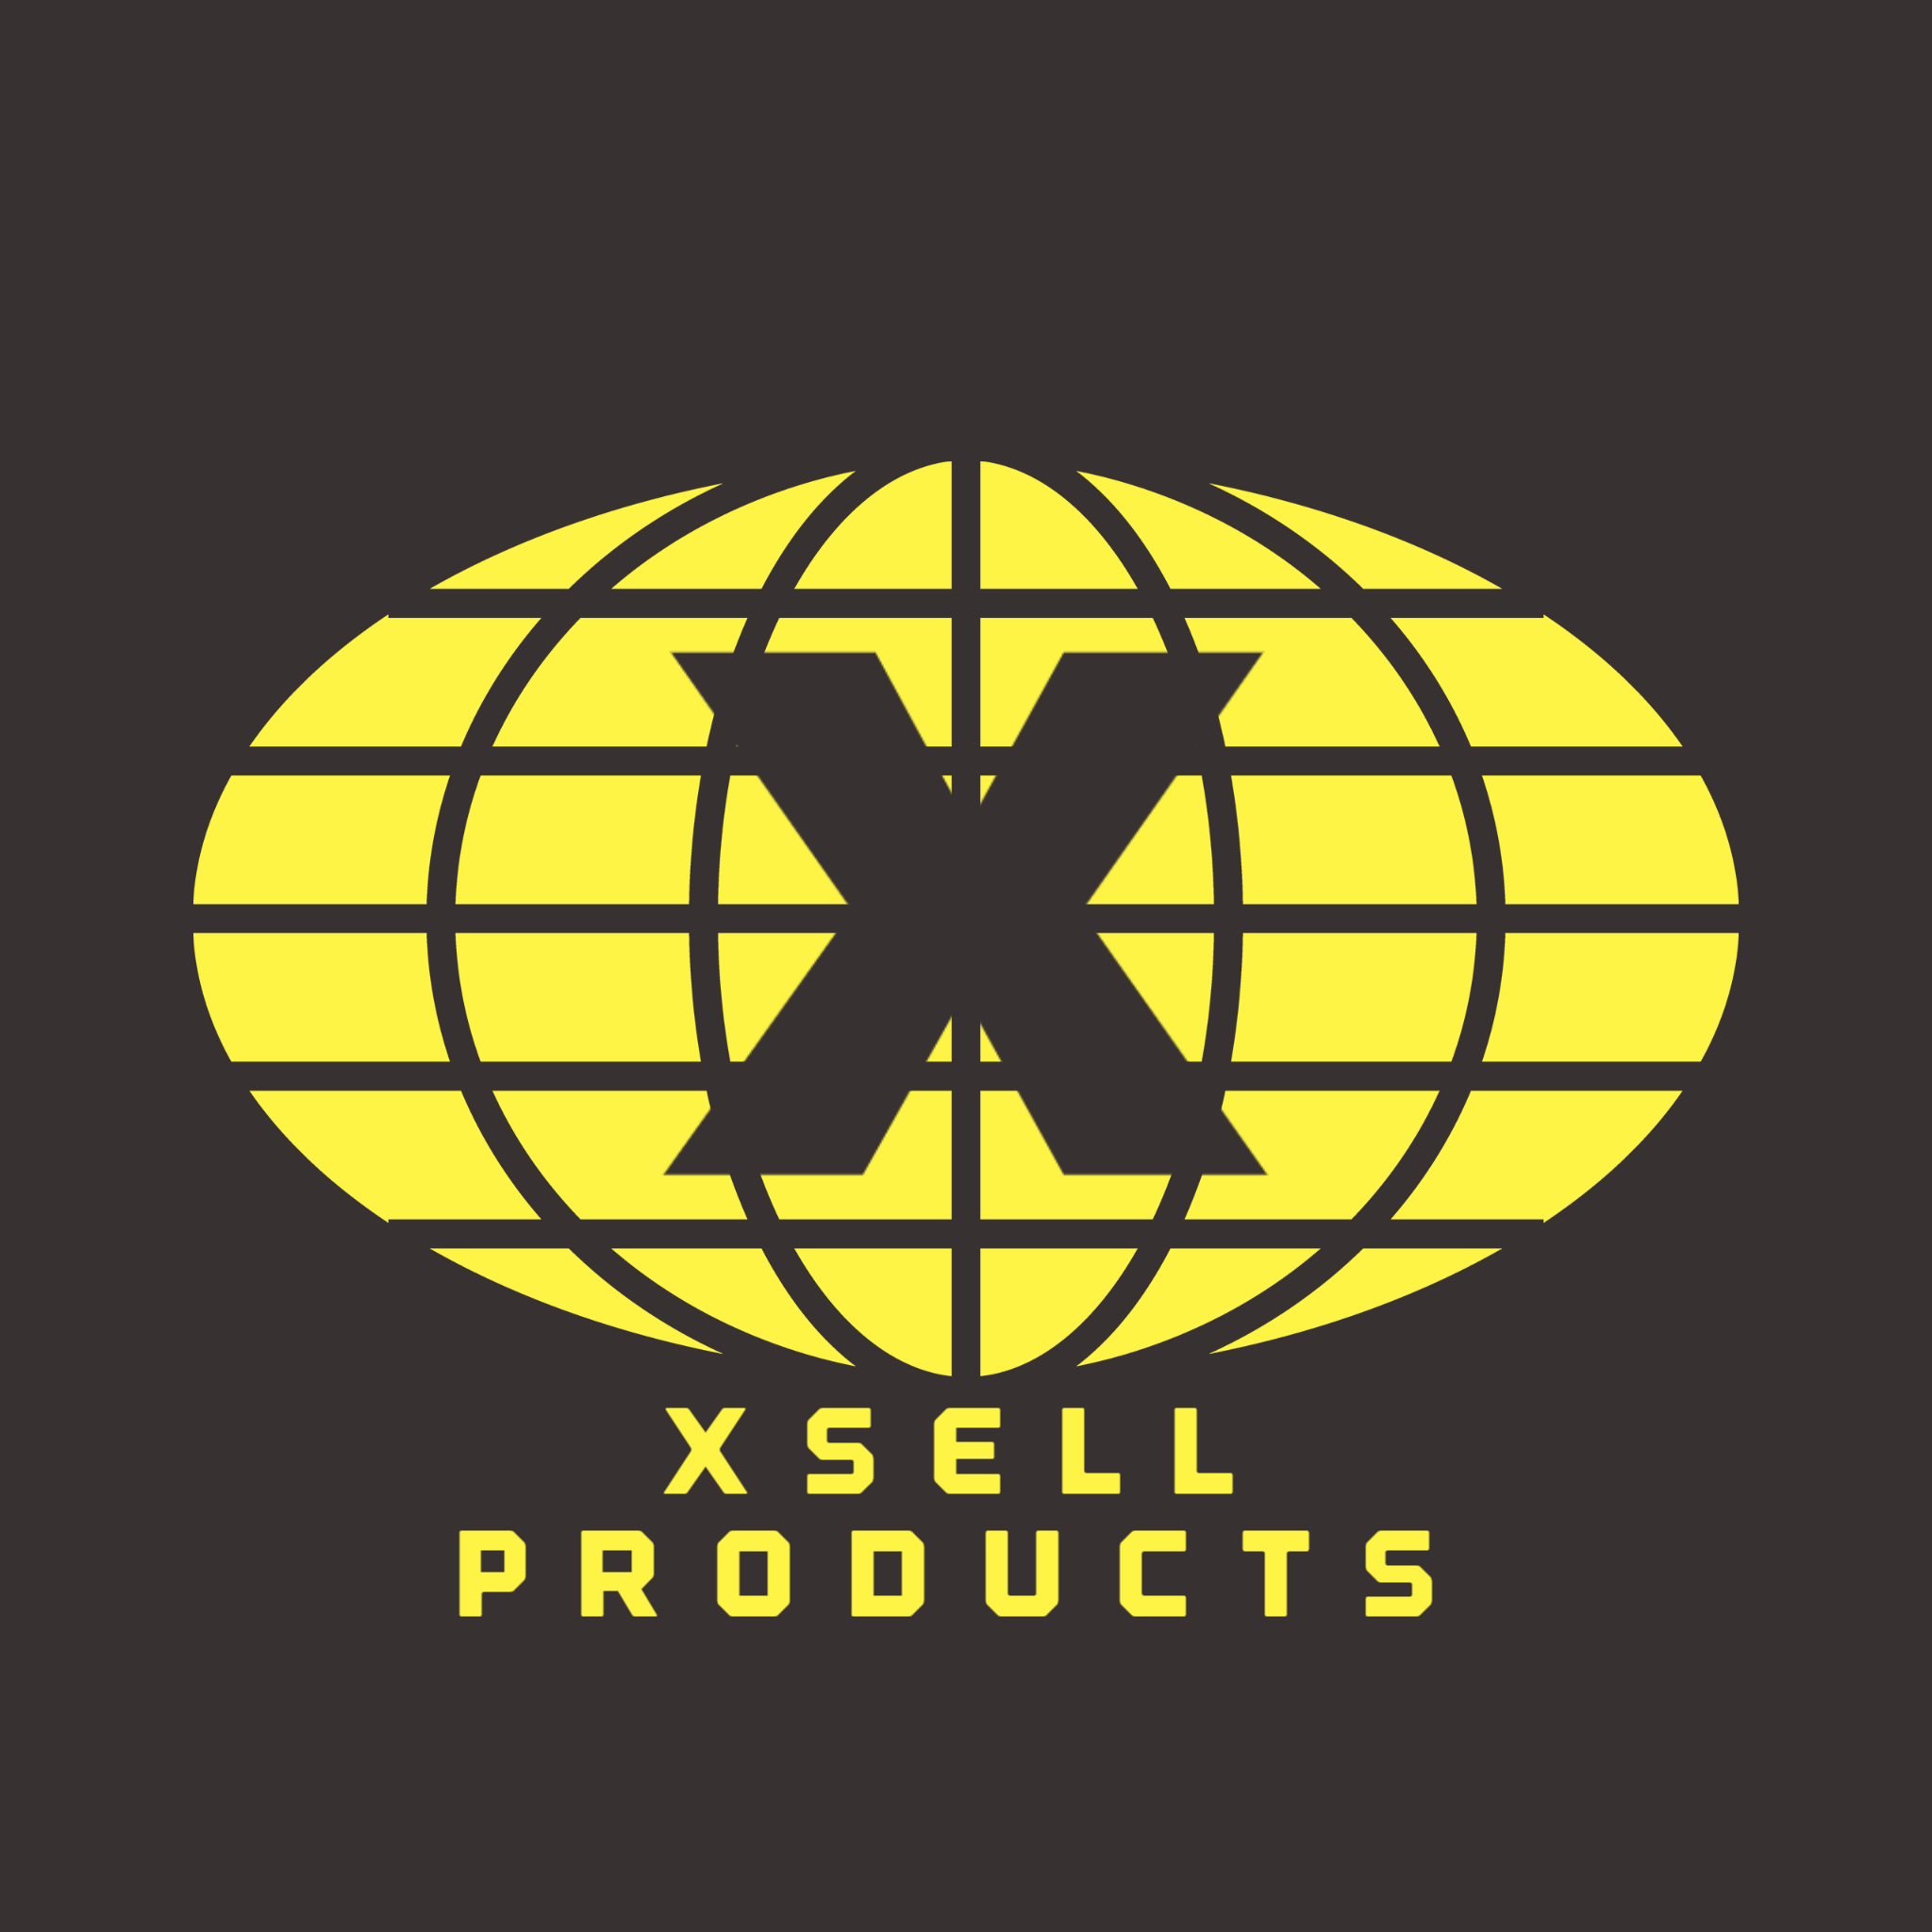 XsellProducts